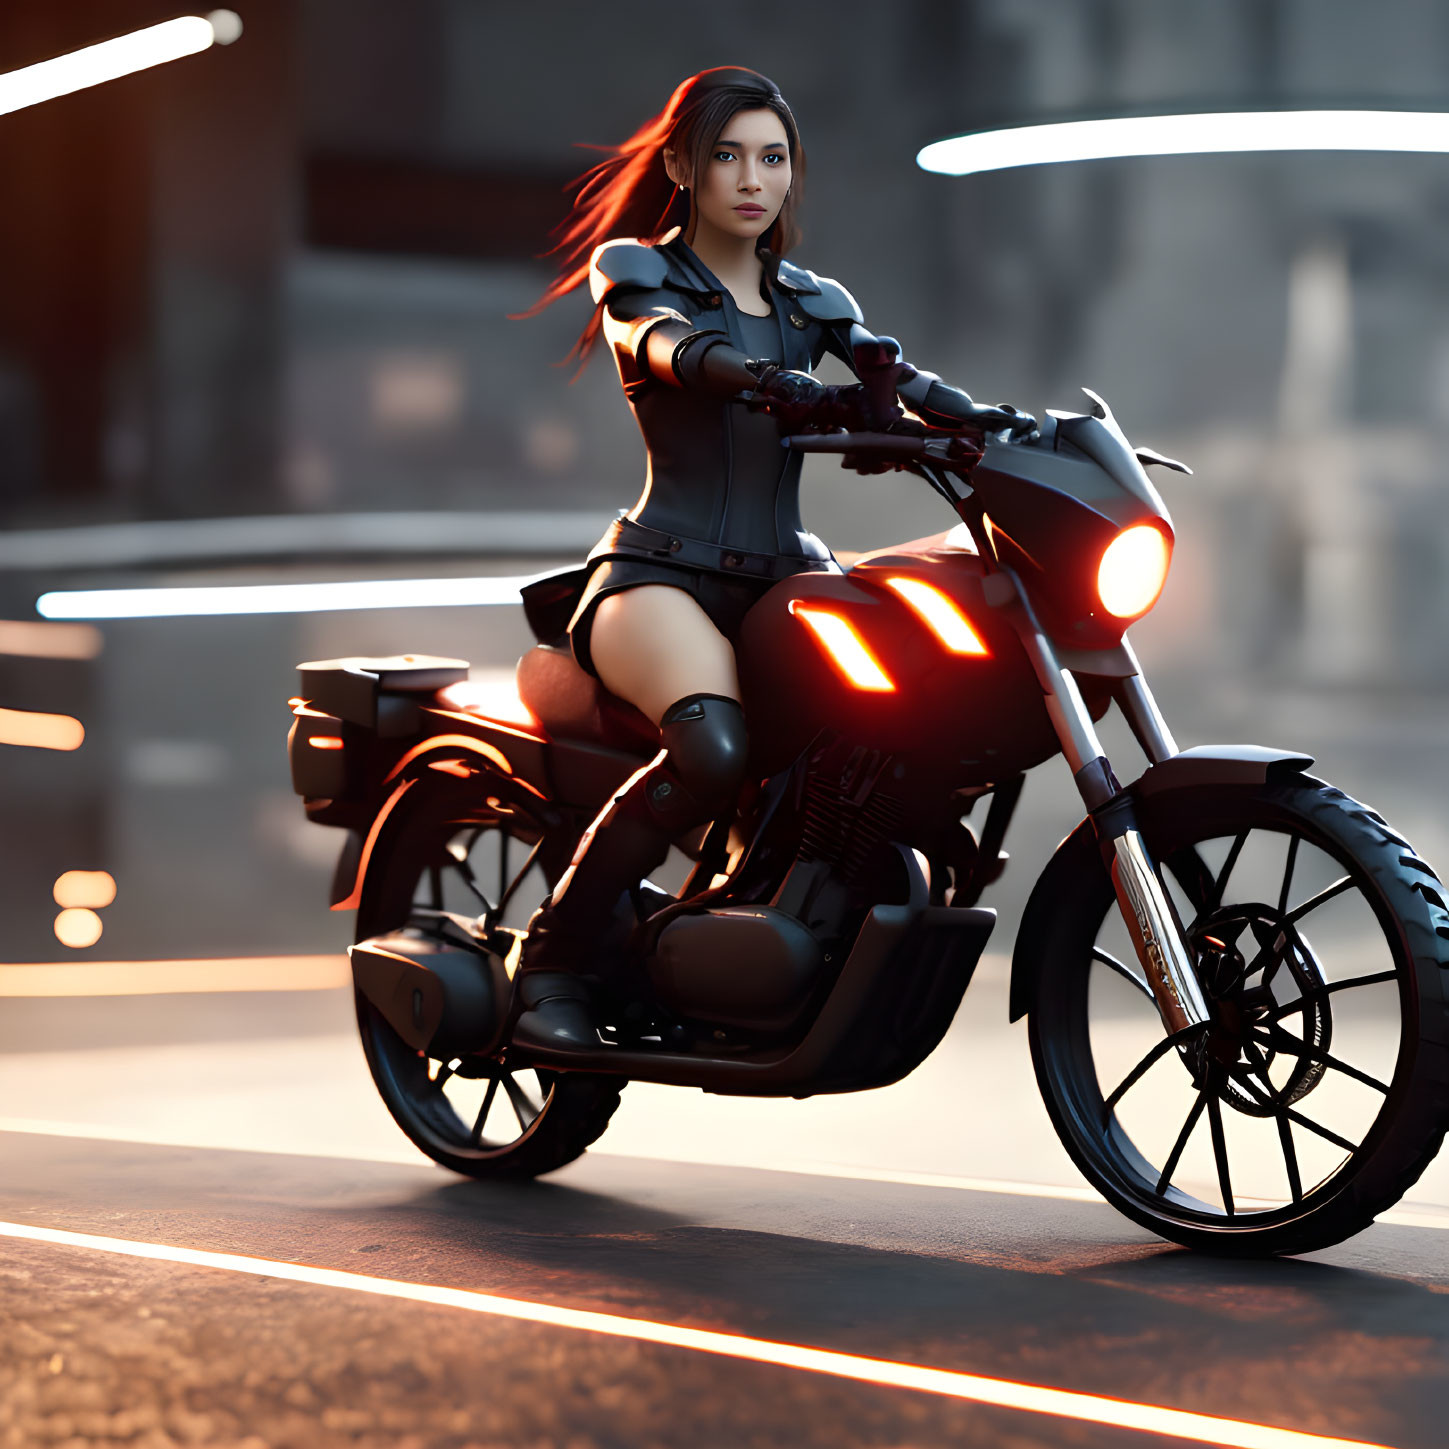 Digital illustration: Red-haired woman on futuristic motorcycle in neon-lit urban street